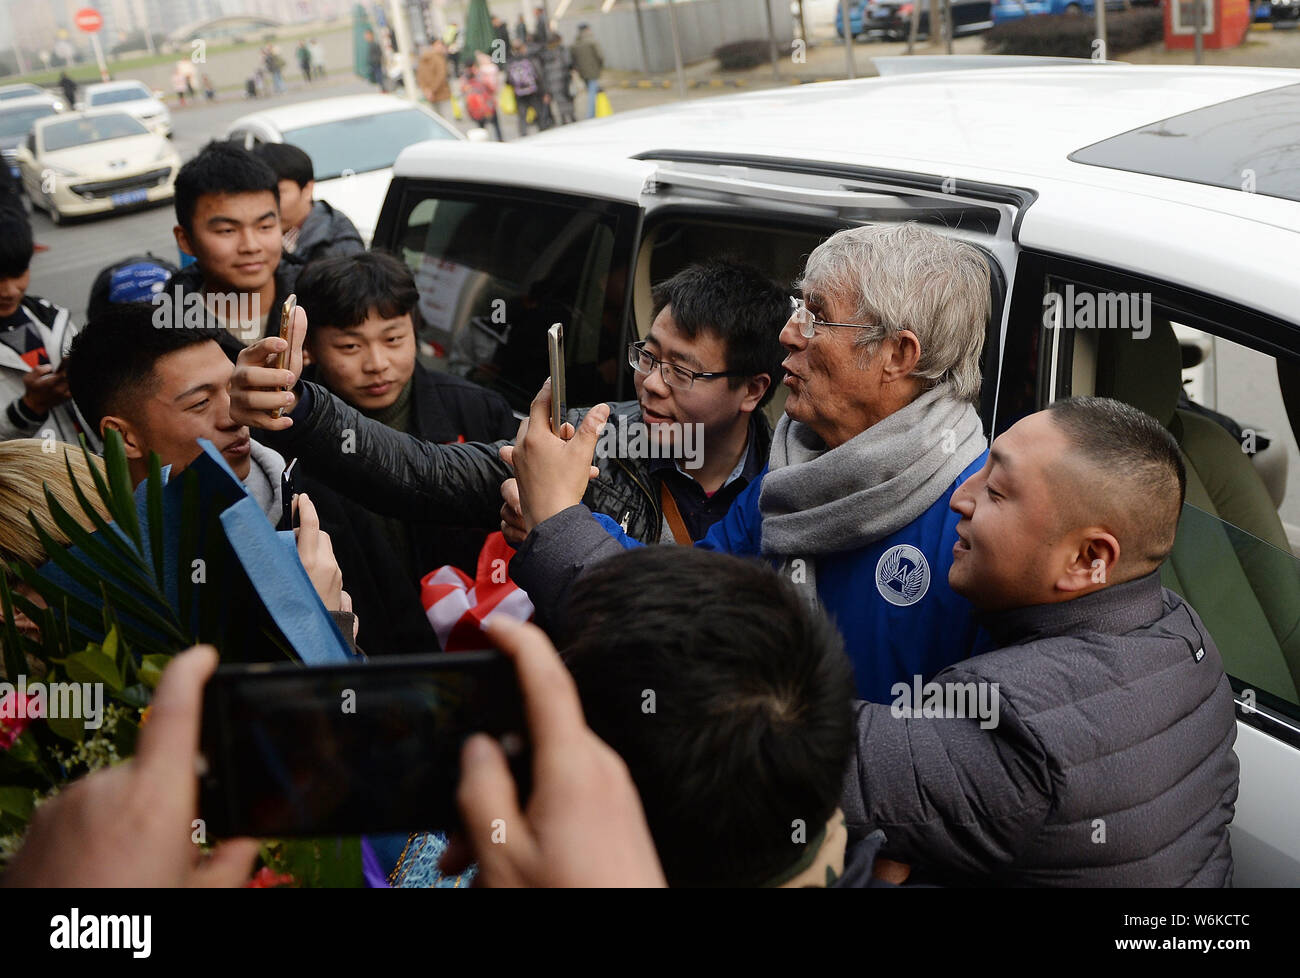 Serbian football coach and former player Bora Milutinovic, center, takes selfies with fans as he arrives at the Chengdu Shuangliu International Airpor Stock Photo